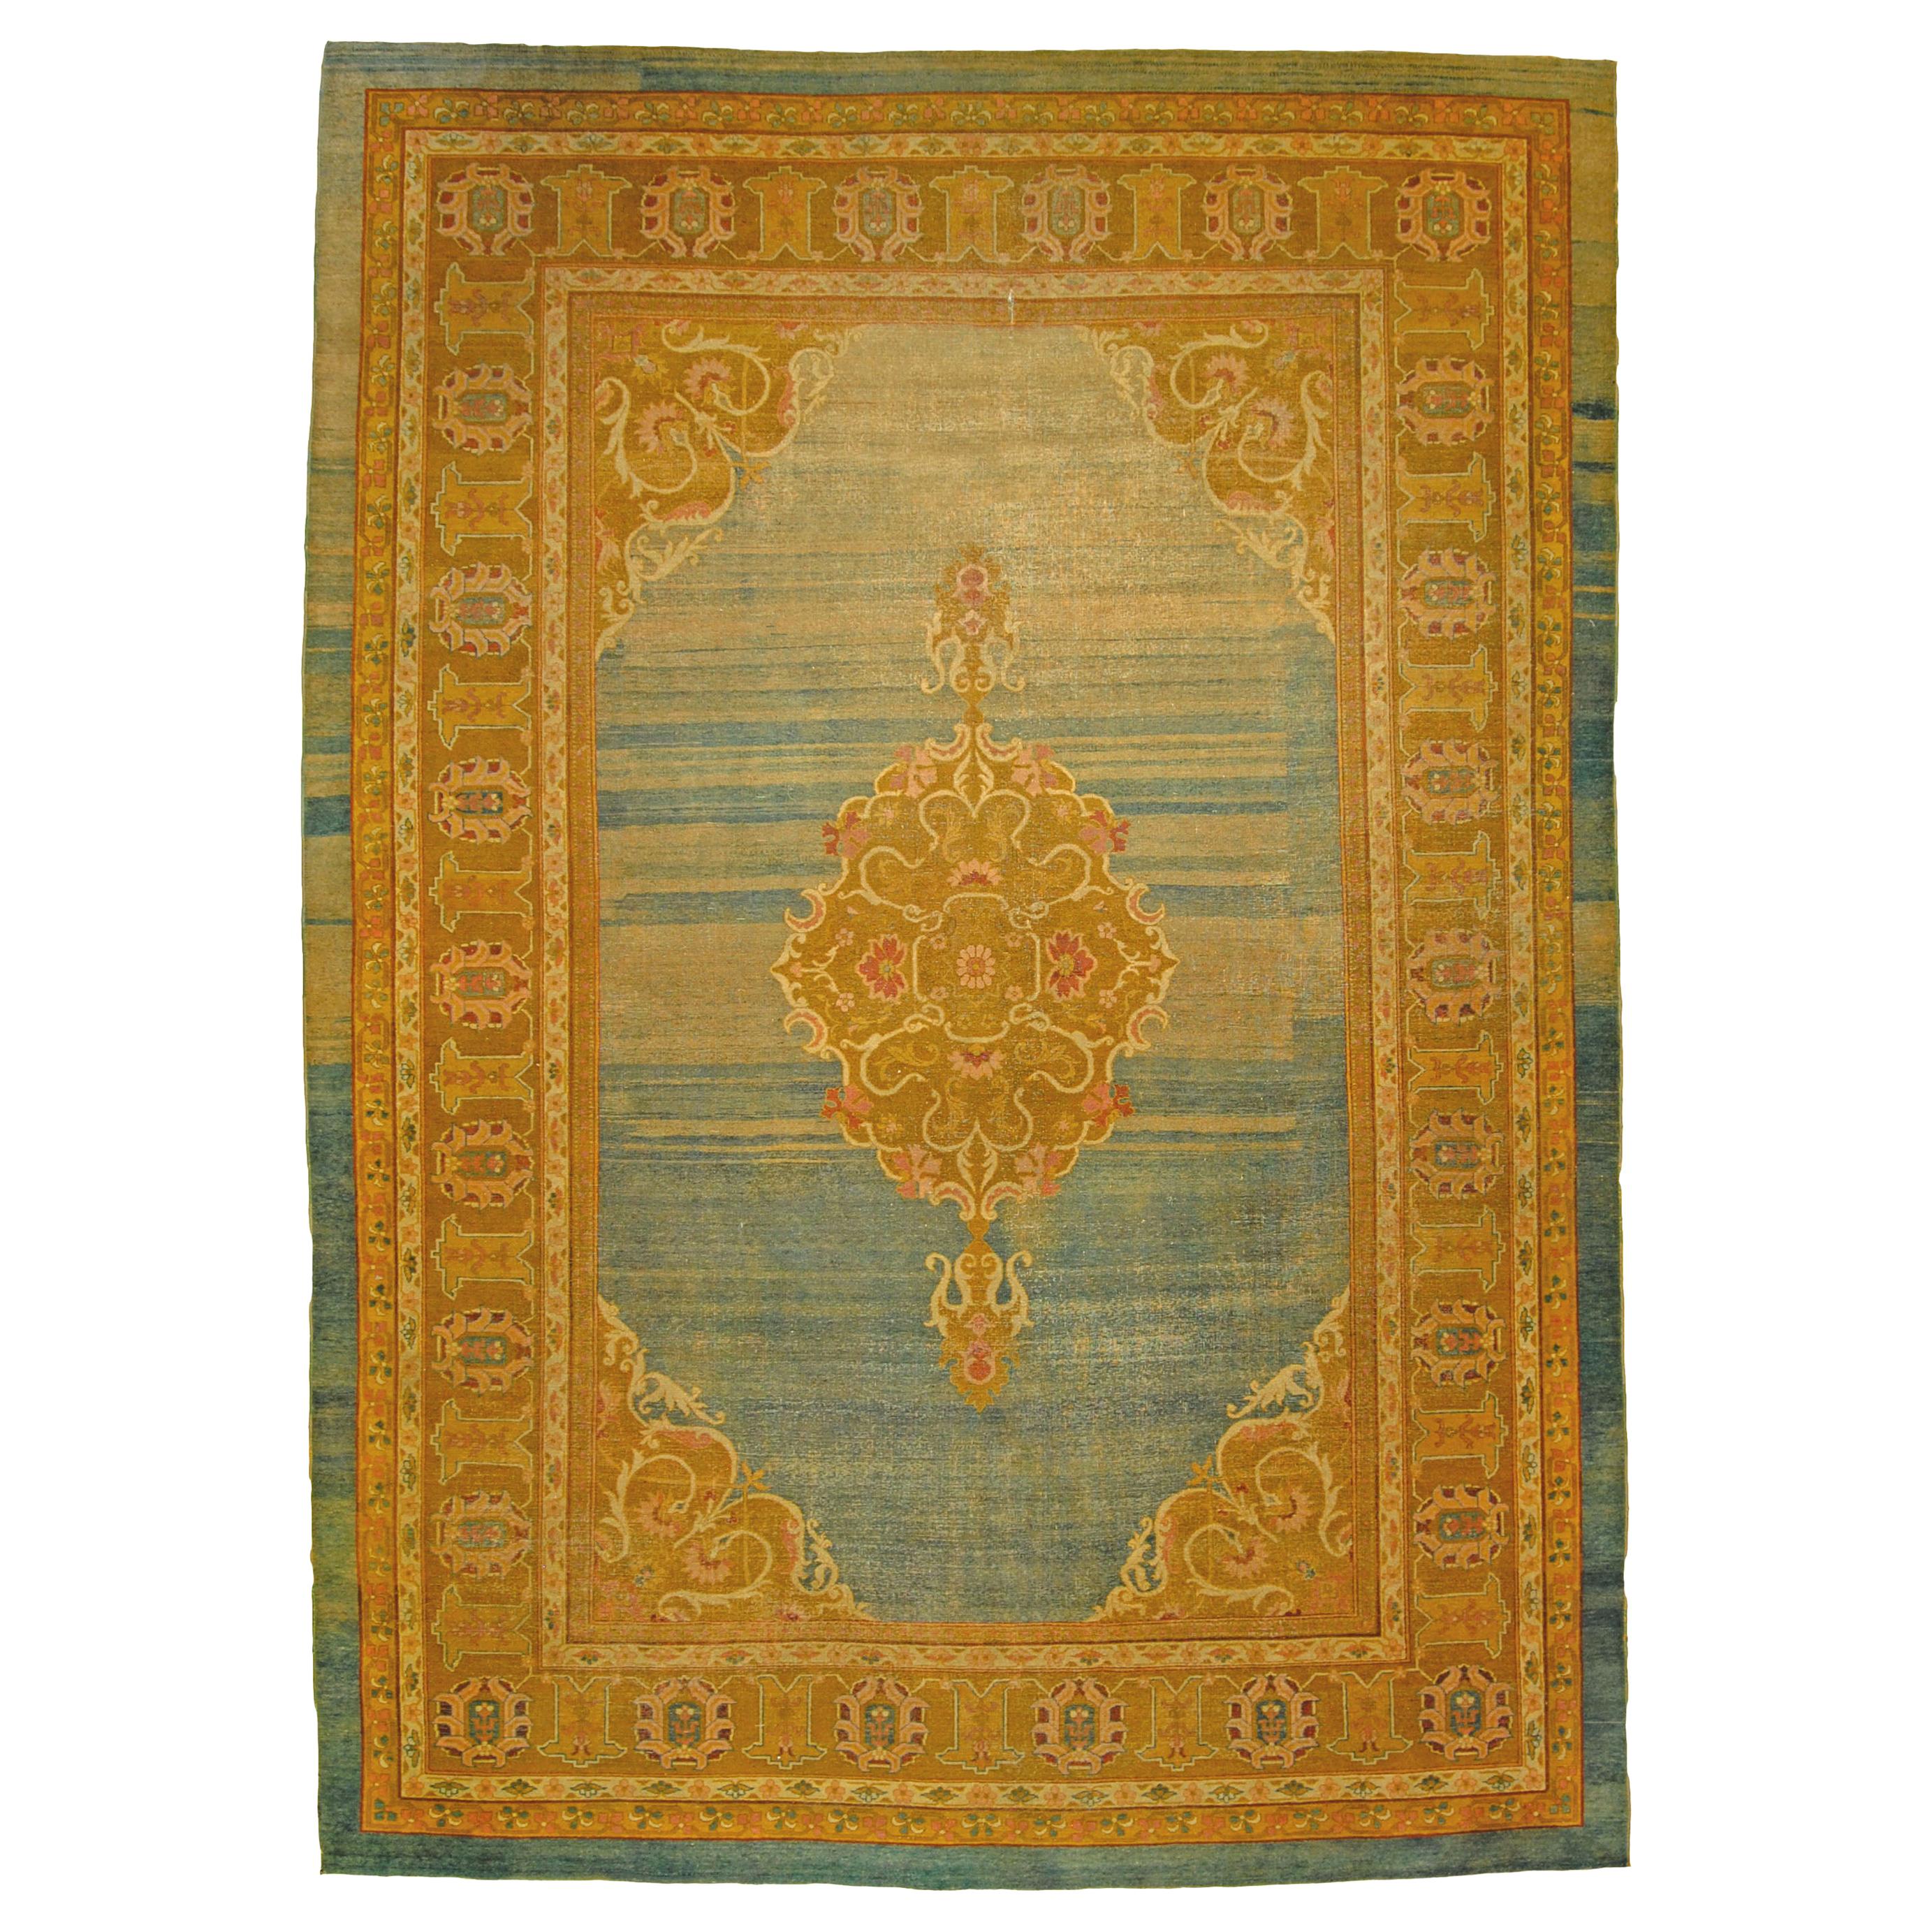 20th Century Green, Gold, Pink White Abrash Amritsar Rug from India, circa 1870s